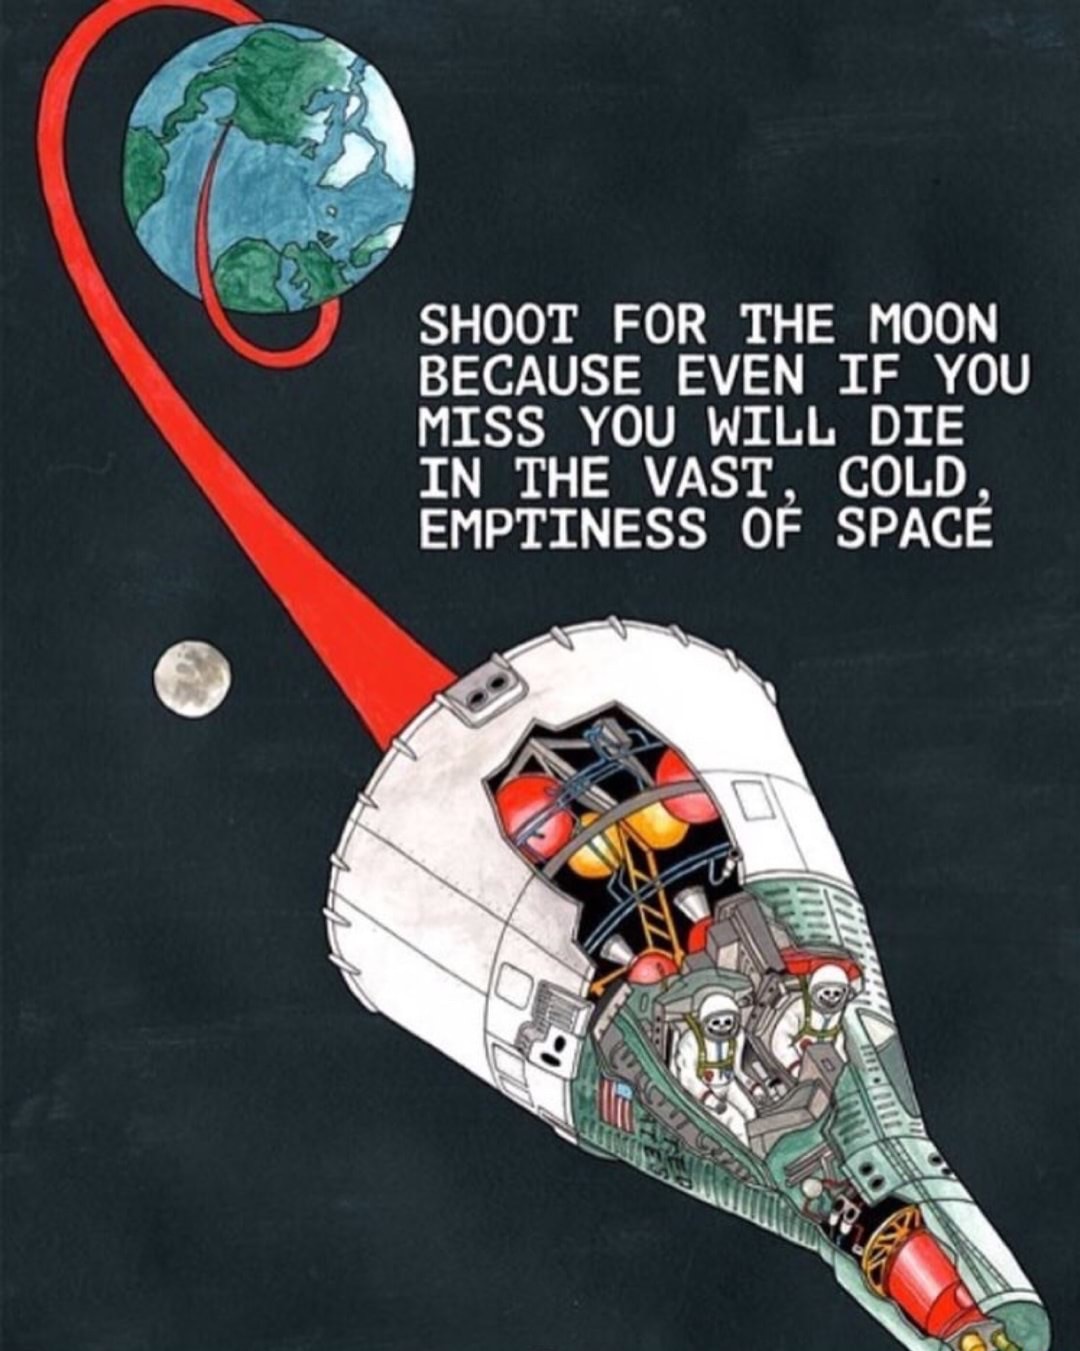 memes - kerbals funny - Shoot For The Moon Because Even If You Miss You Will Die In The Vast, Cold. Emptiness Of Space Nam